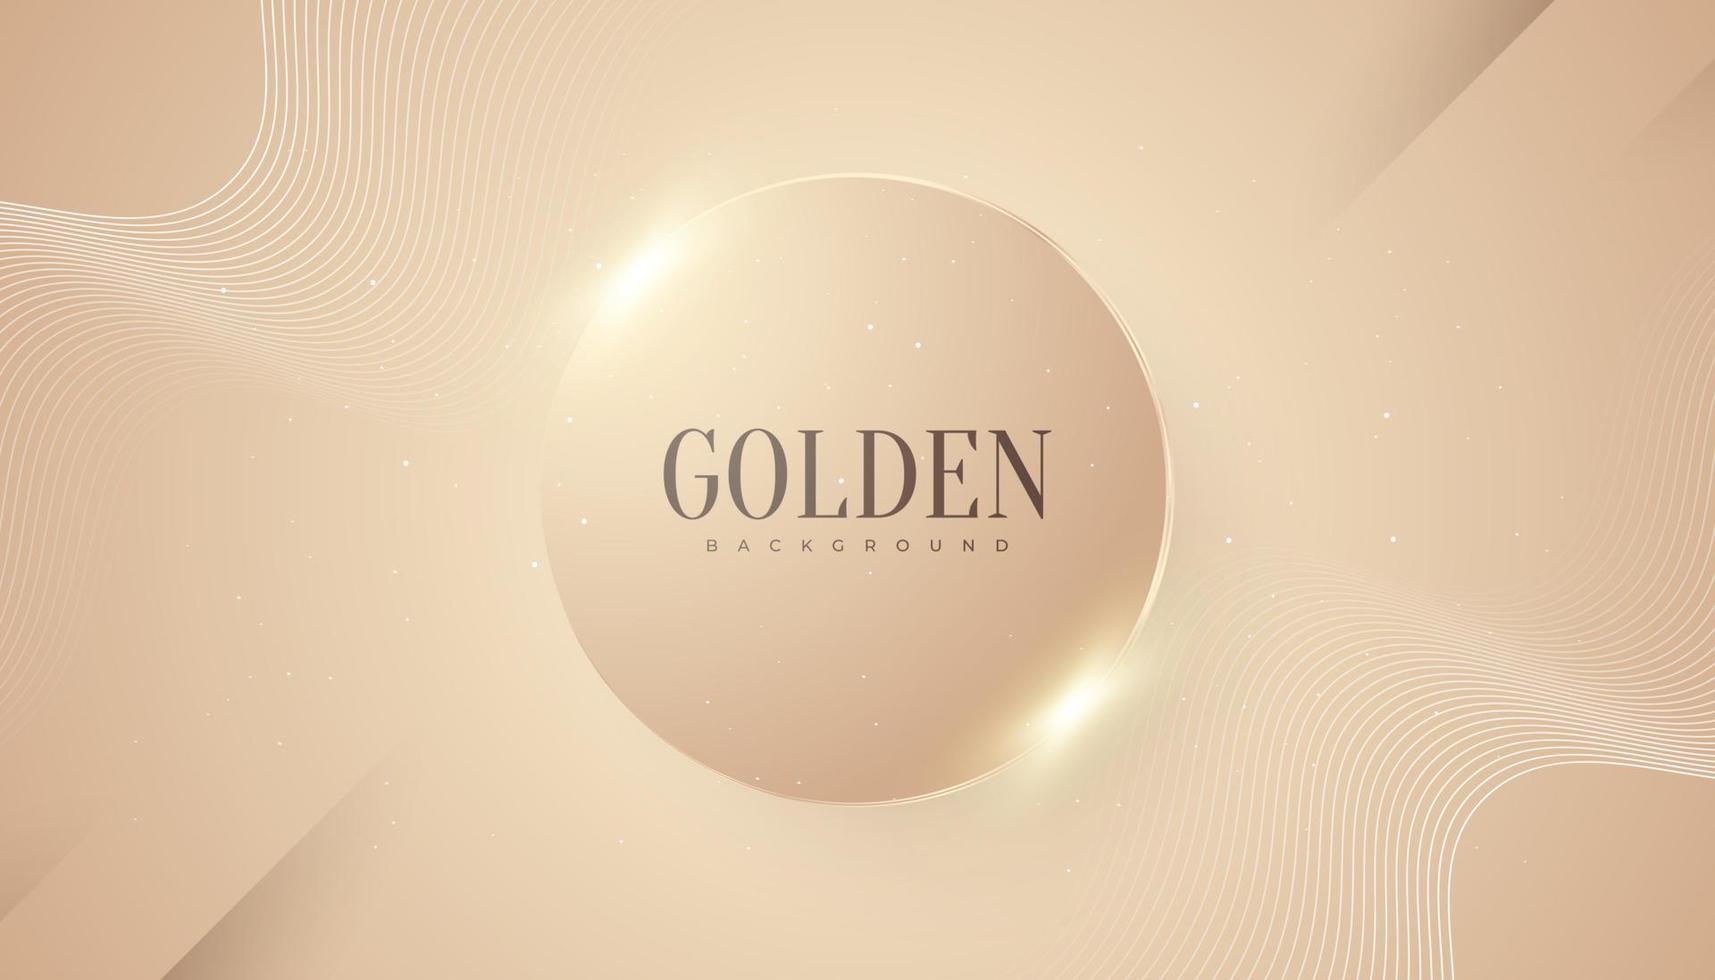 Luxury Golden Background with Glitter and Light Effect. Elegant Cream Background with Wavy Lines and Paper Cut Style vector